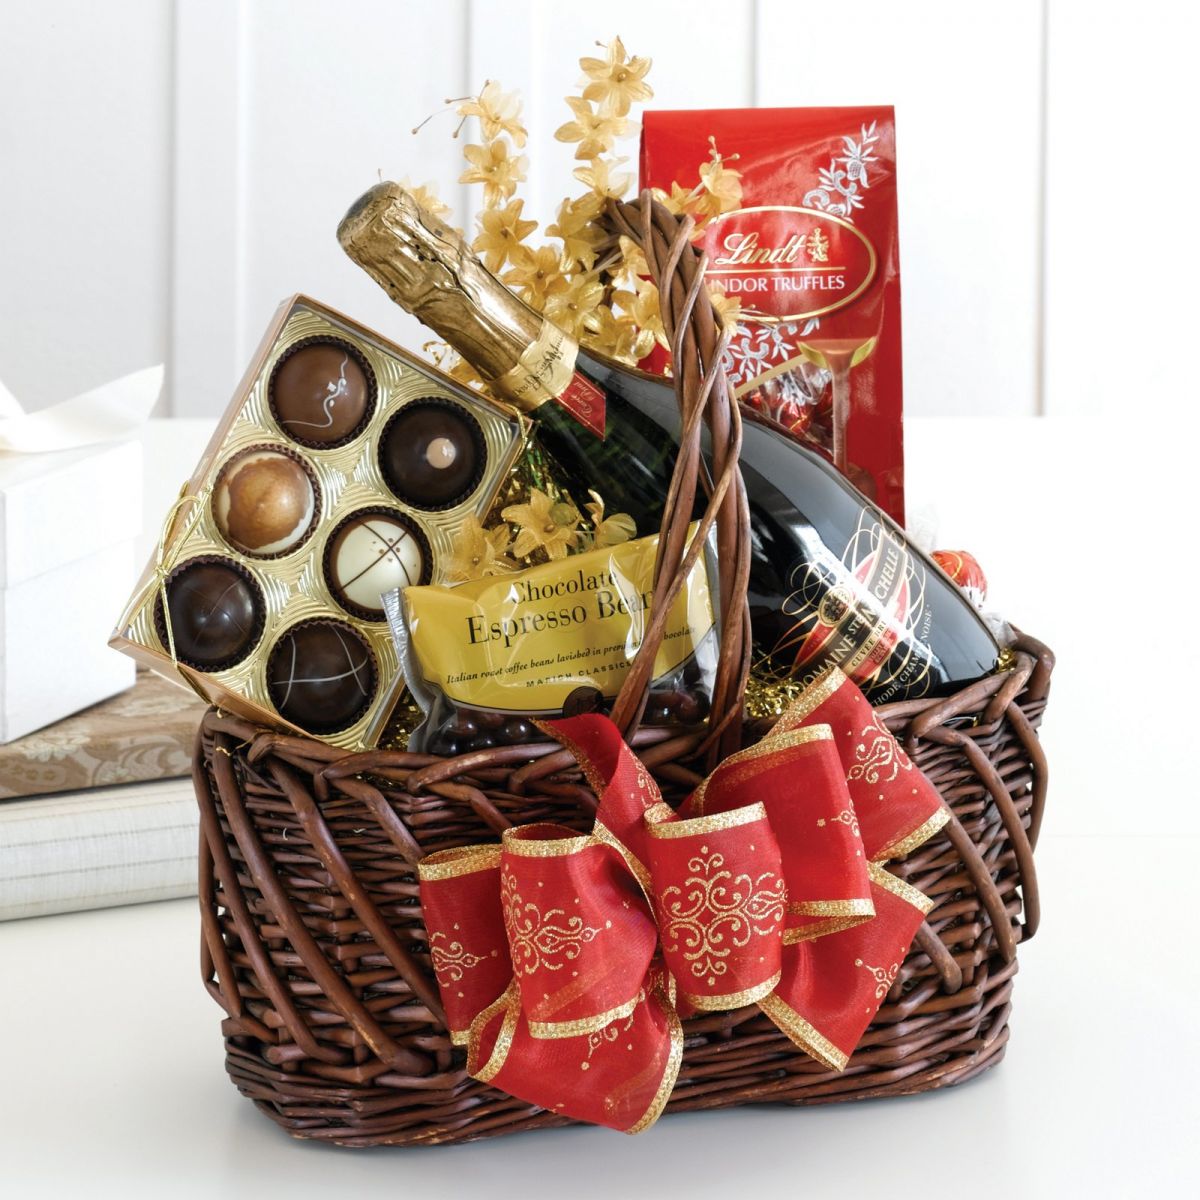 Top 5 Amazing Gift Basket Ideas That You’ll Love | Cool Picking